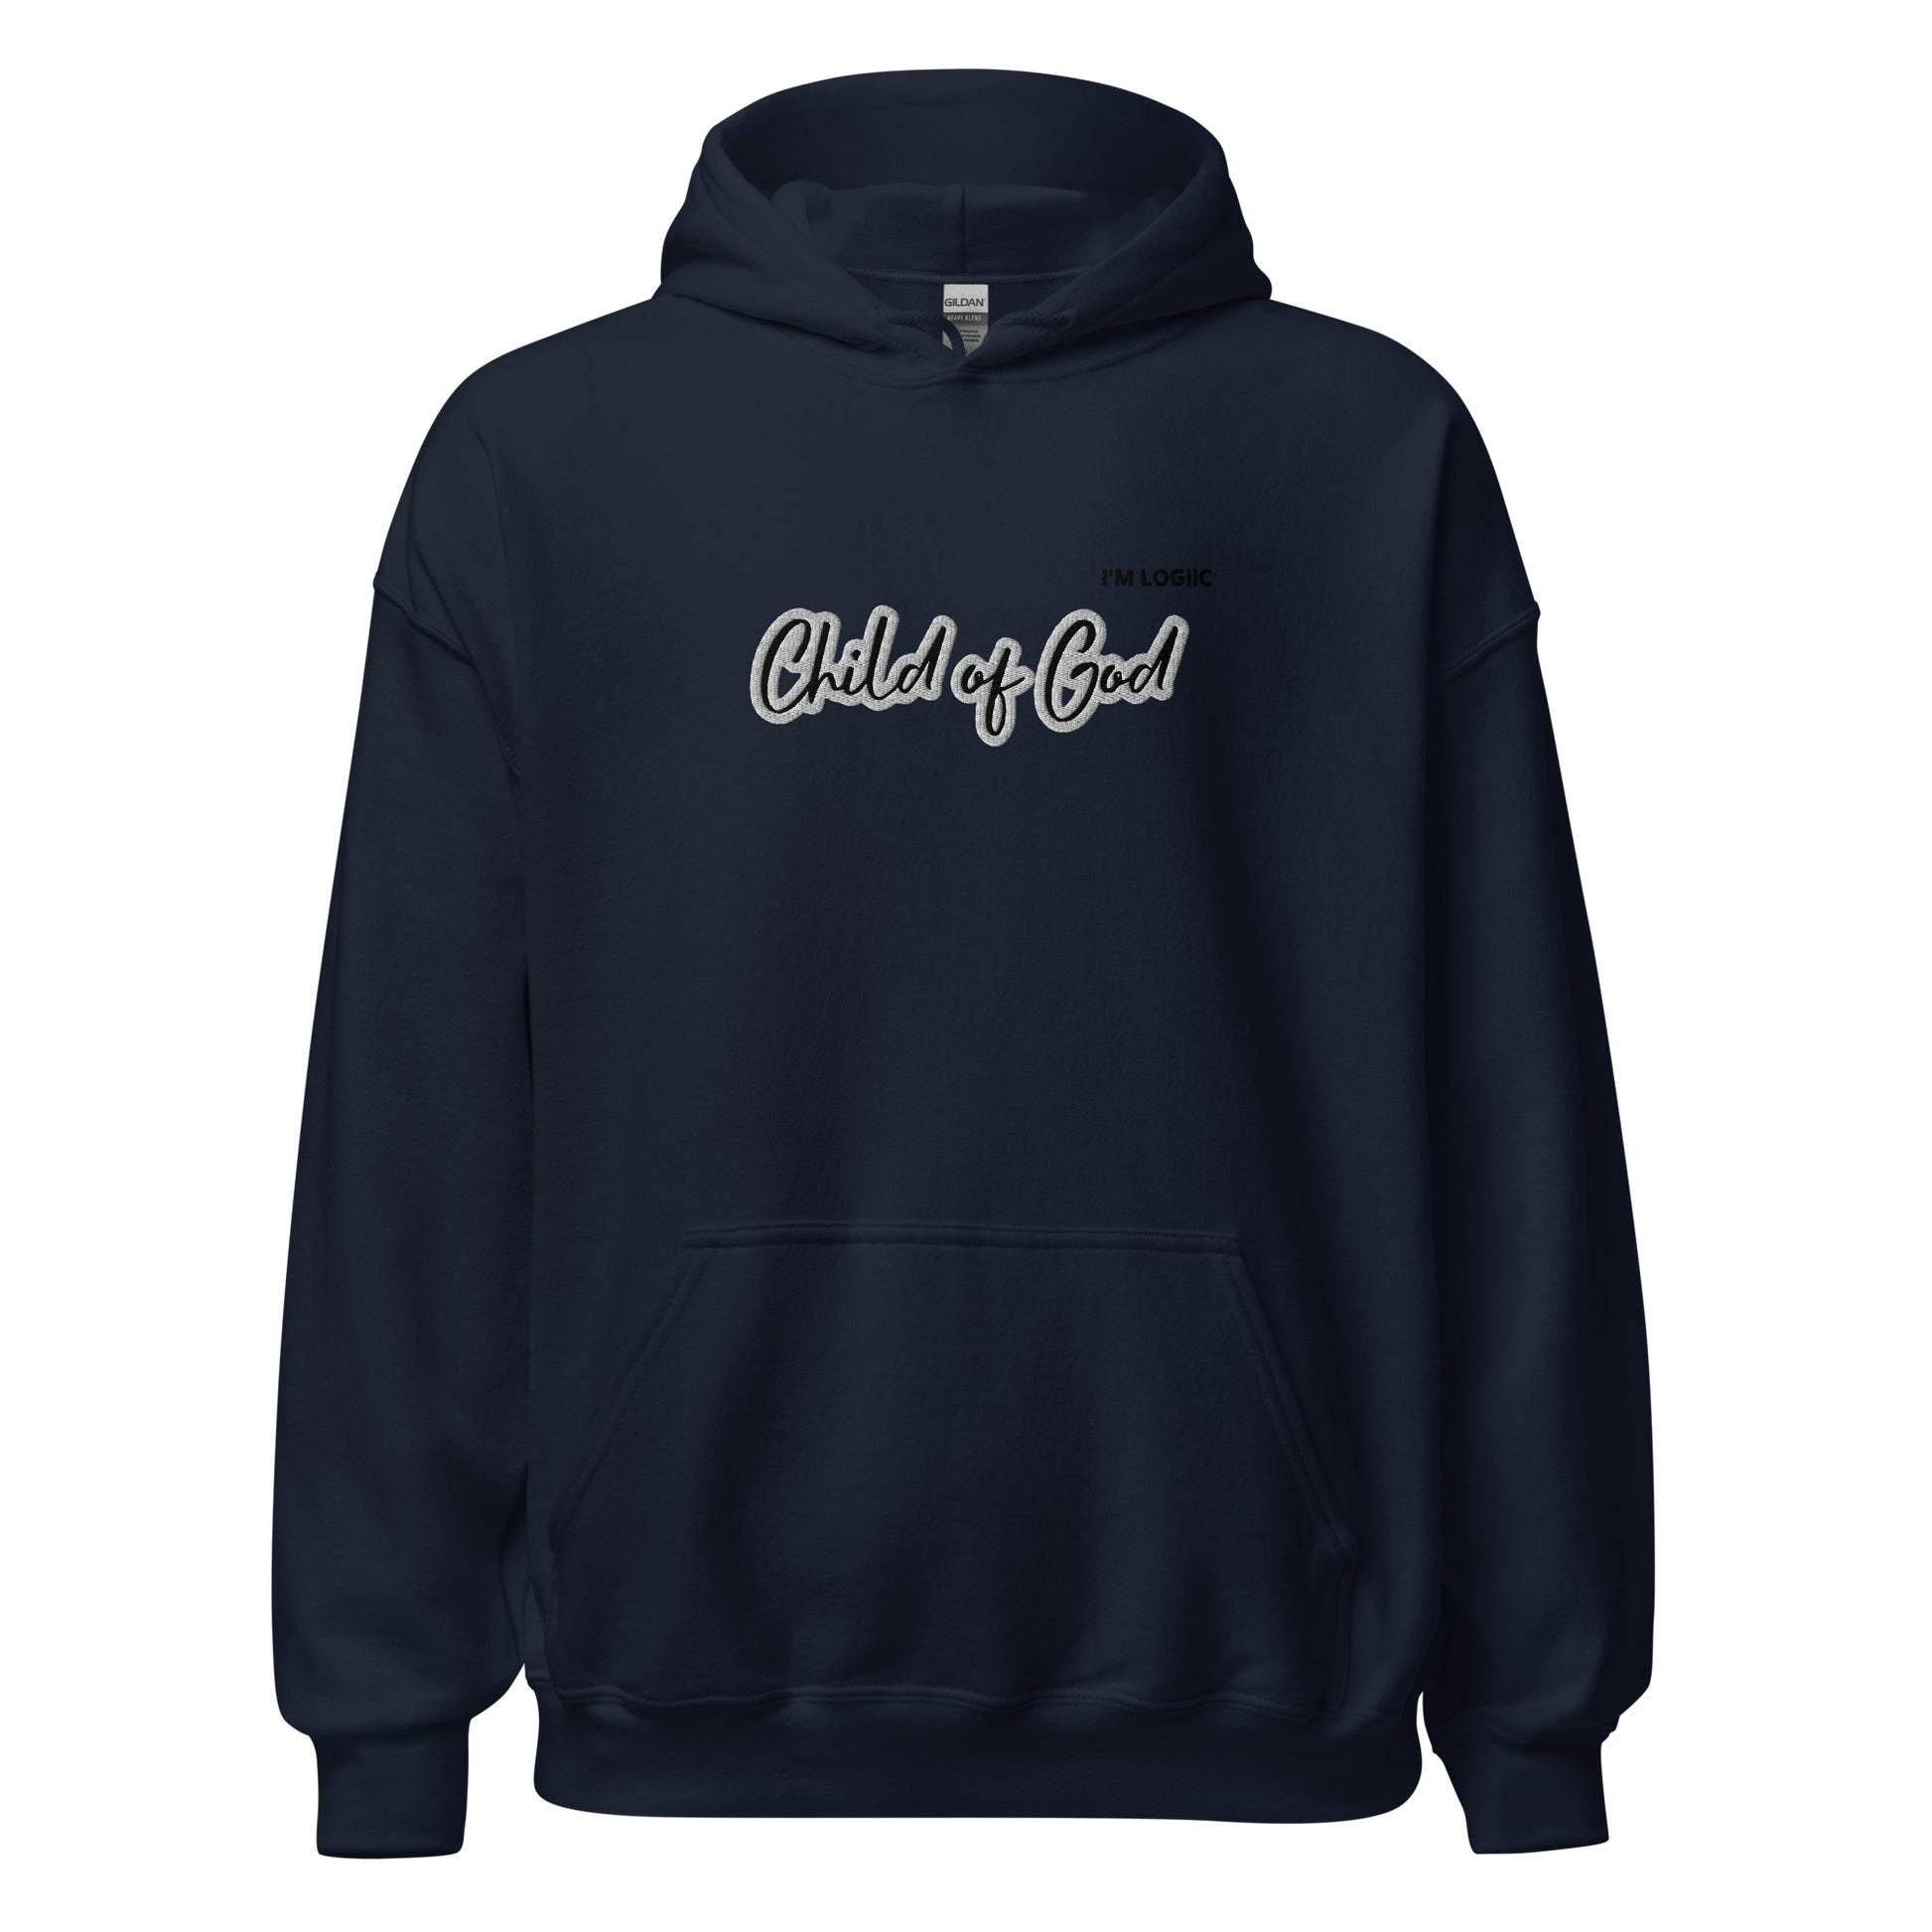 Child Of God Hoodie - Shirts & Tops